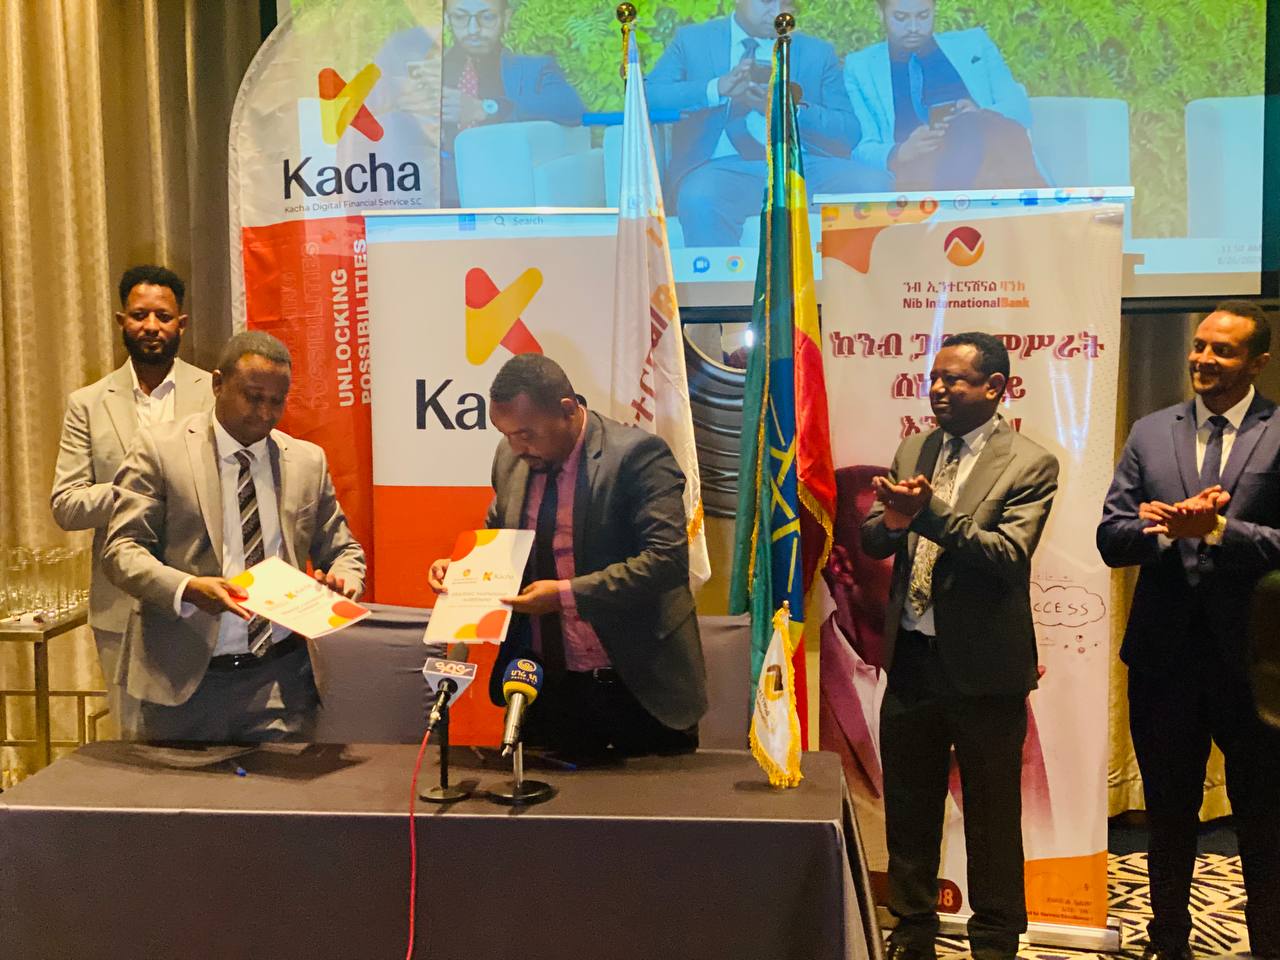 Kacha Digital Financial Services S.C Partners with Banks to Launch Non-Collateral Digital Lending Services.